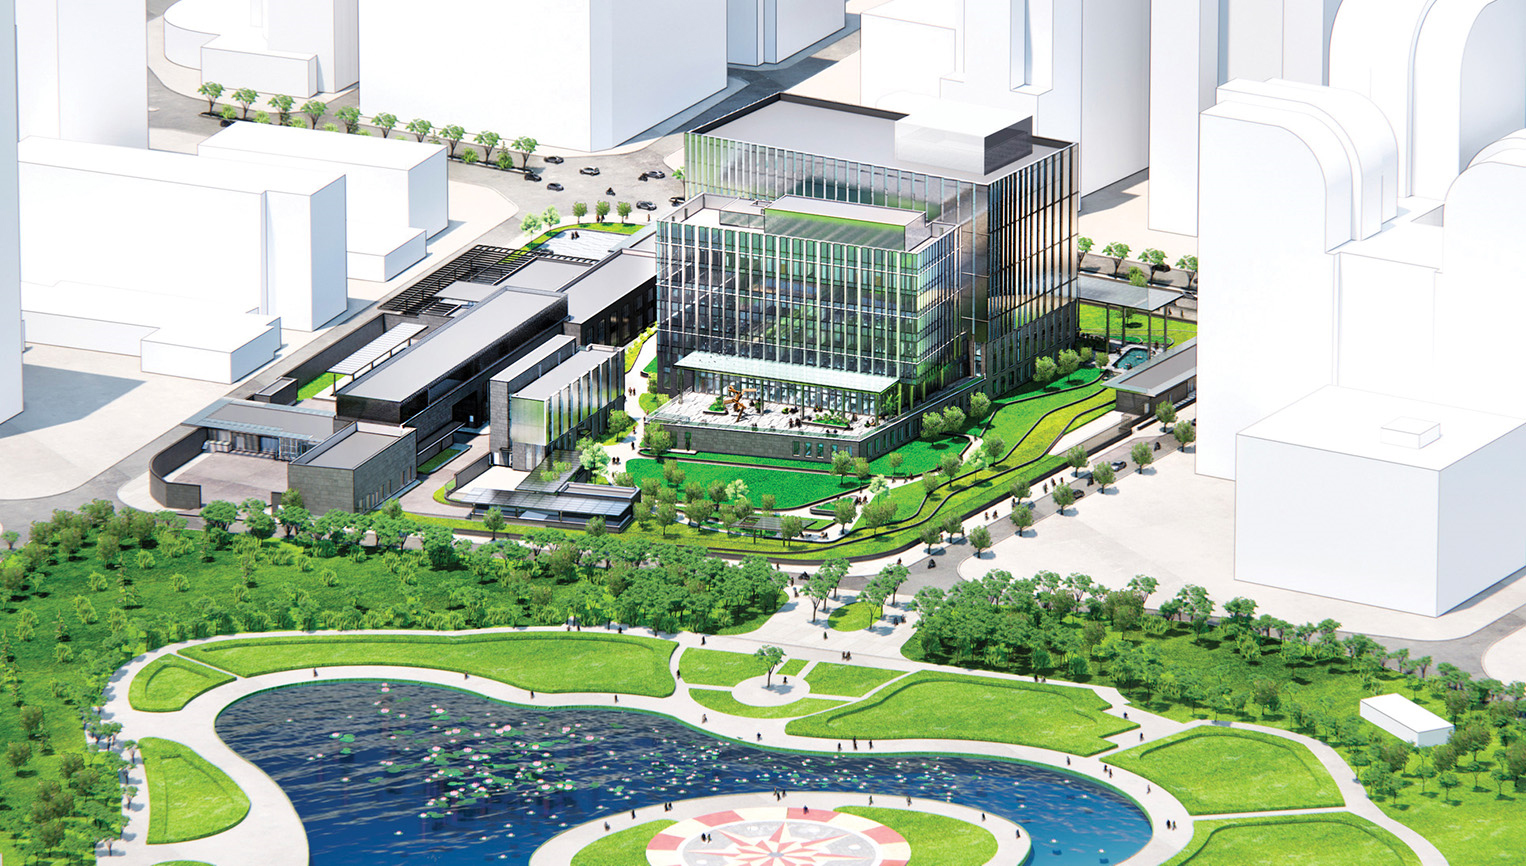 EYP’s rendering of the New Embassy Campus showing its relation with Cau Giay Park